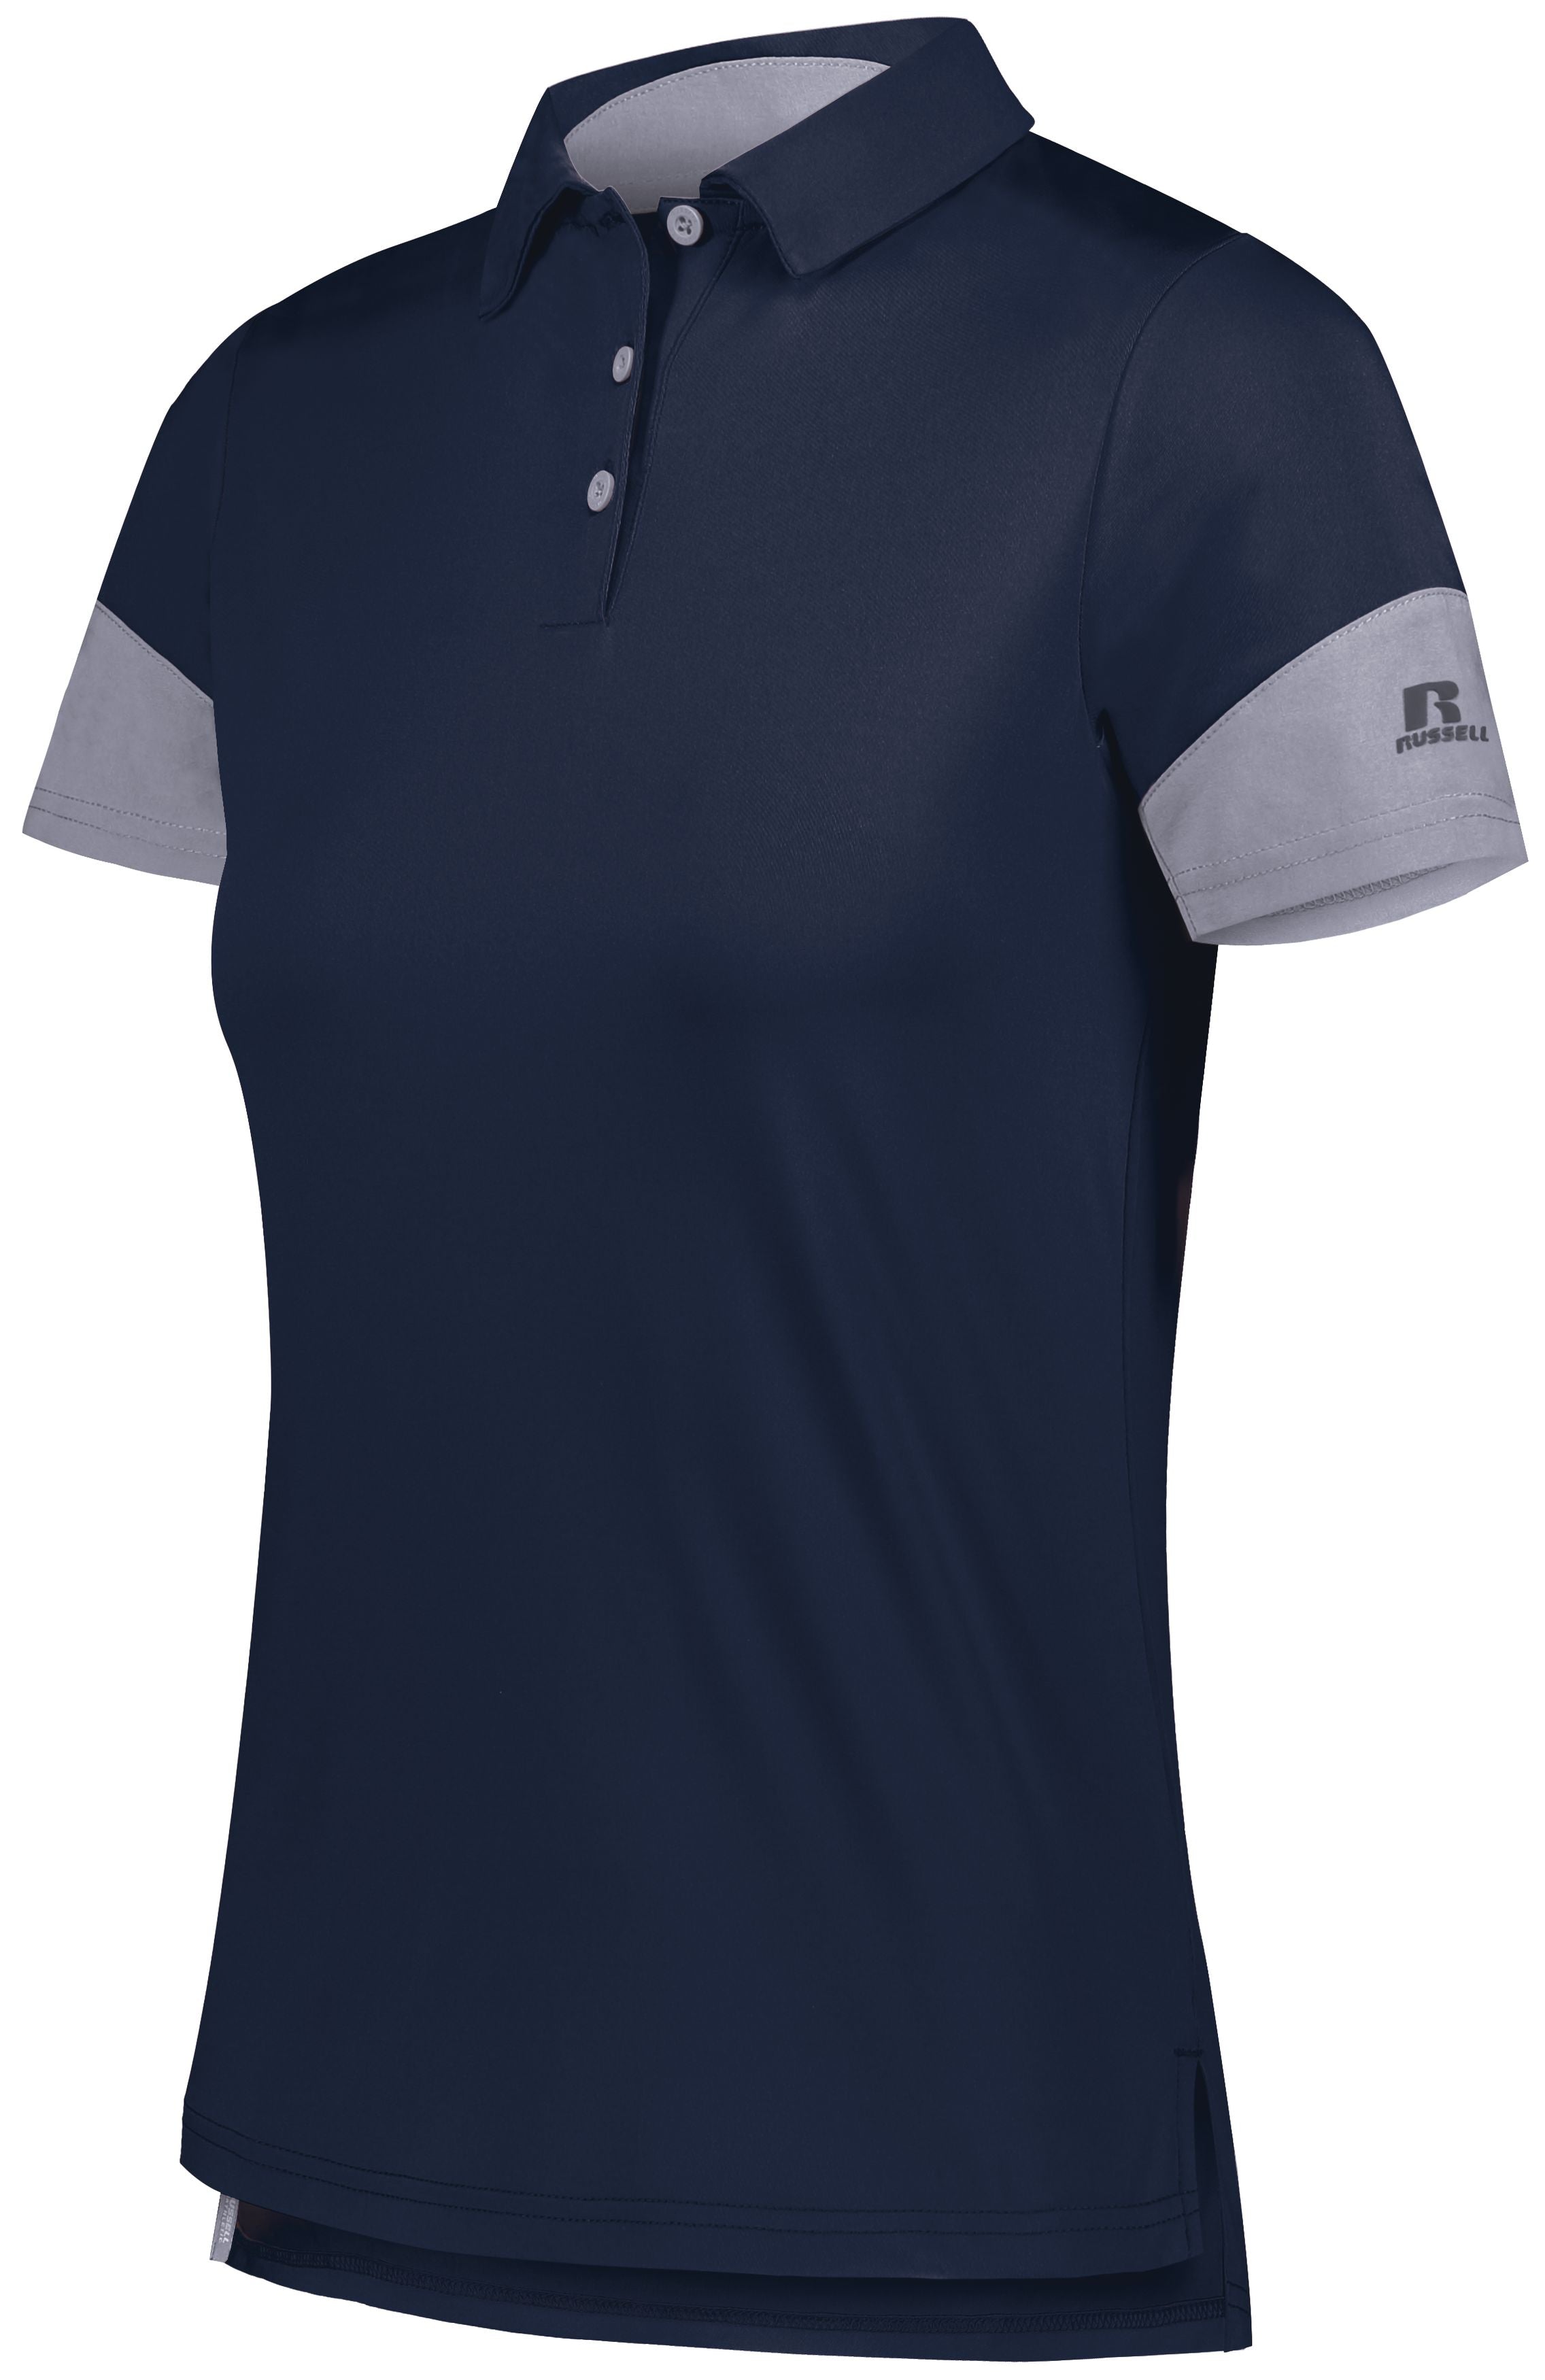 Russell Athletic Ladies Hybrid Polo in Navy/Steel  -Part of the Ladies, Ladies-Polo, Polos, Russell-Athletic-Products, Shirts product lines at KanaleyCreations.com